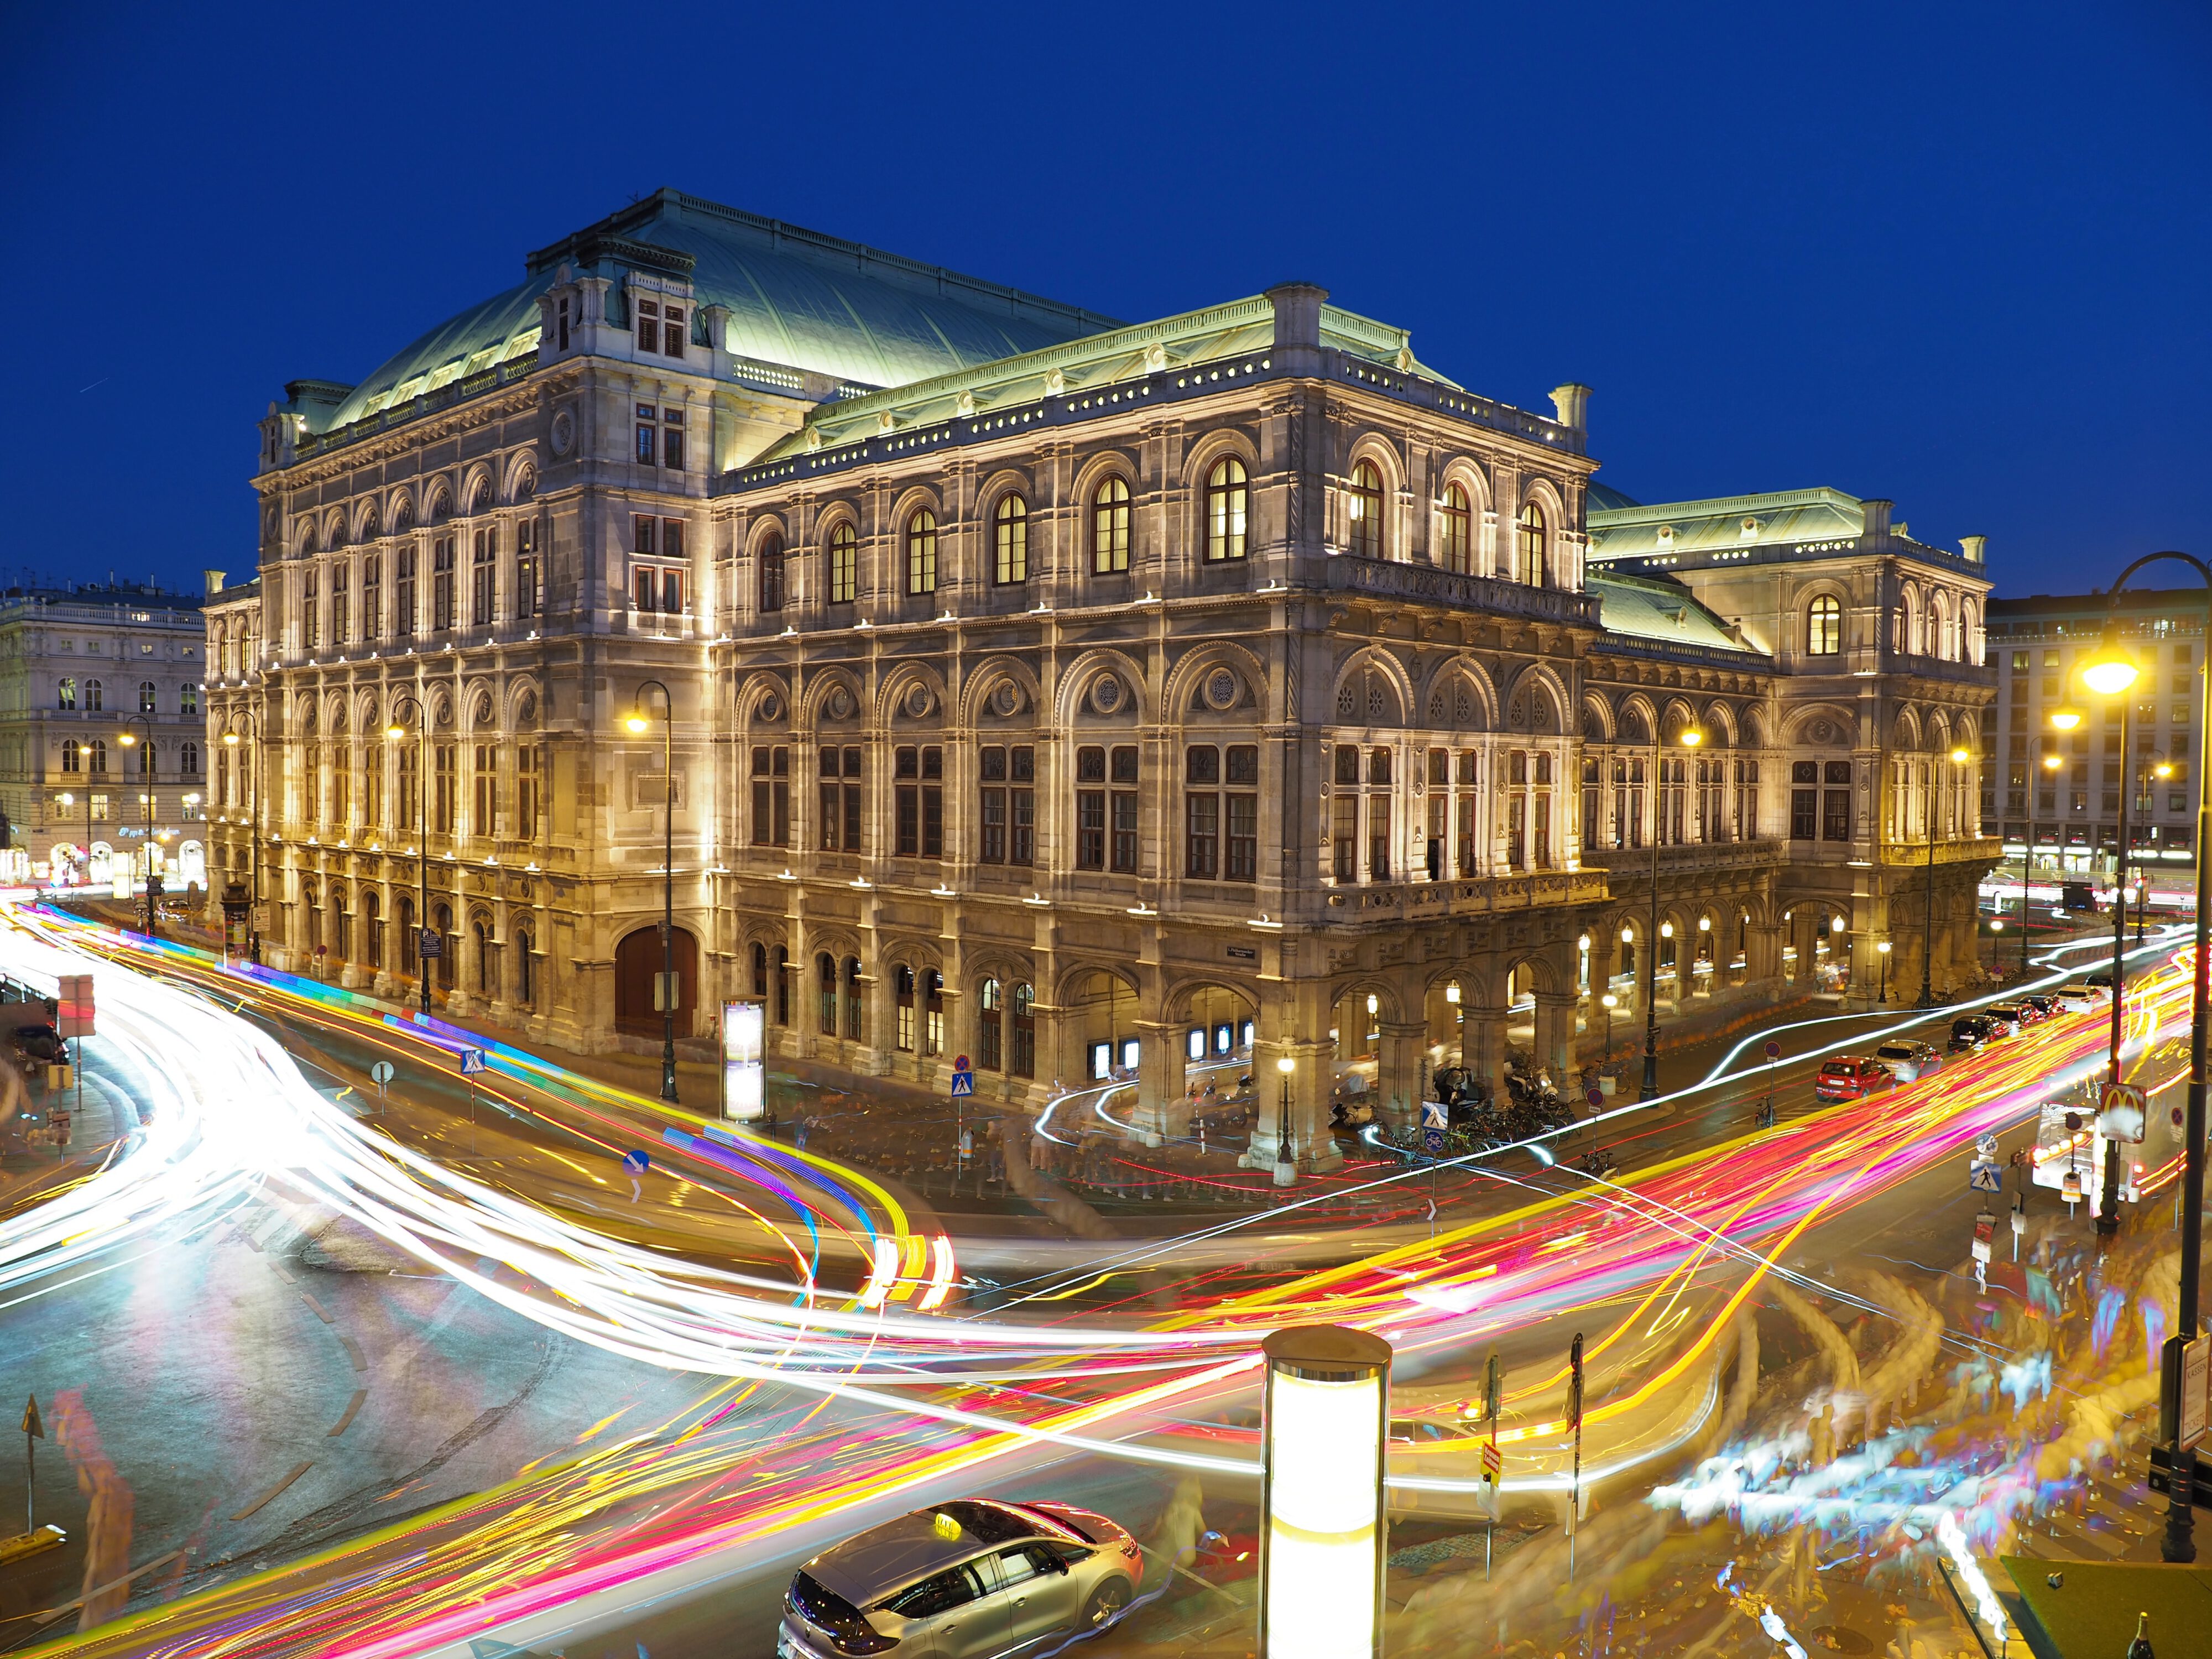 Nightshot of the Vienna Opera House with its famous facade in Neo-Renaissance Style.